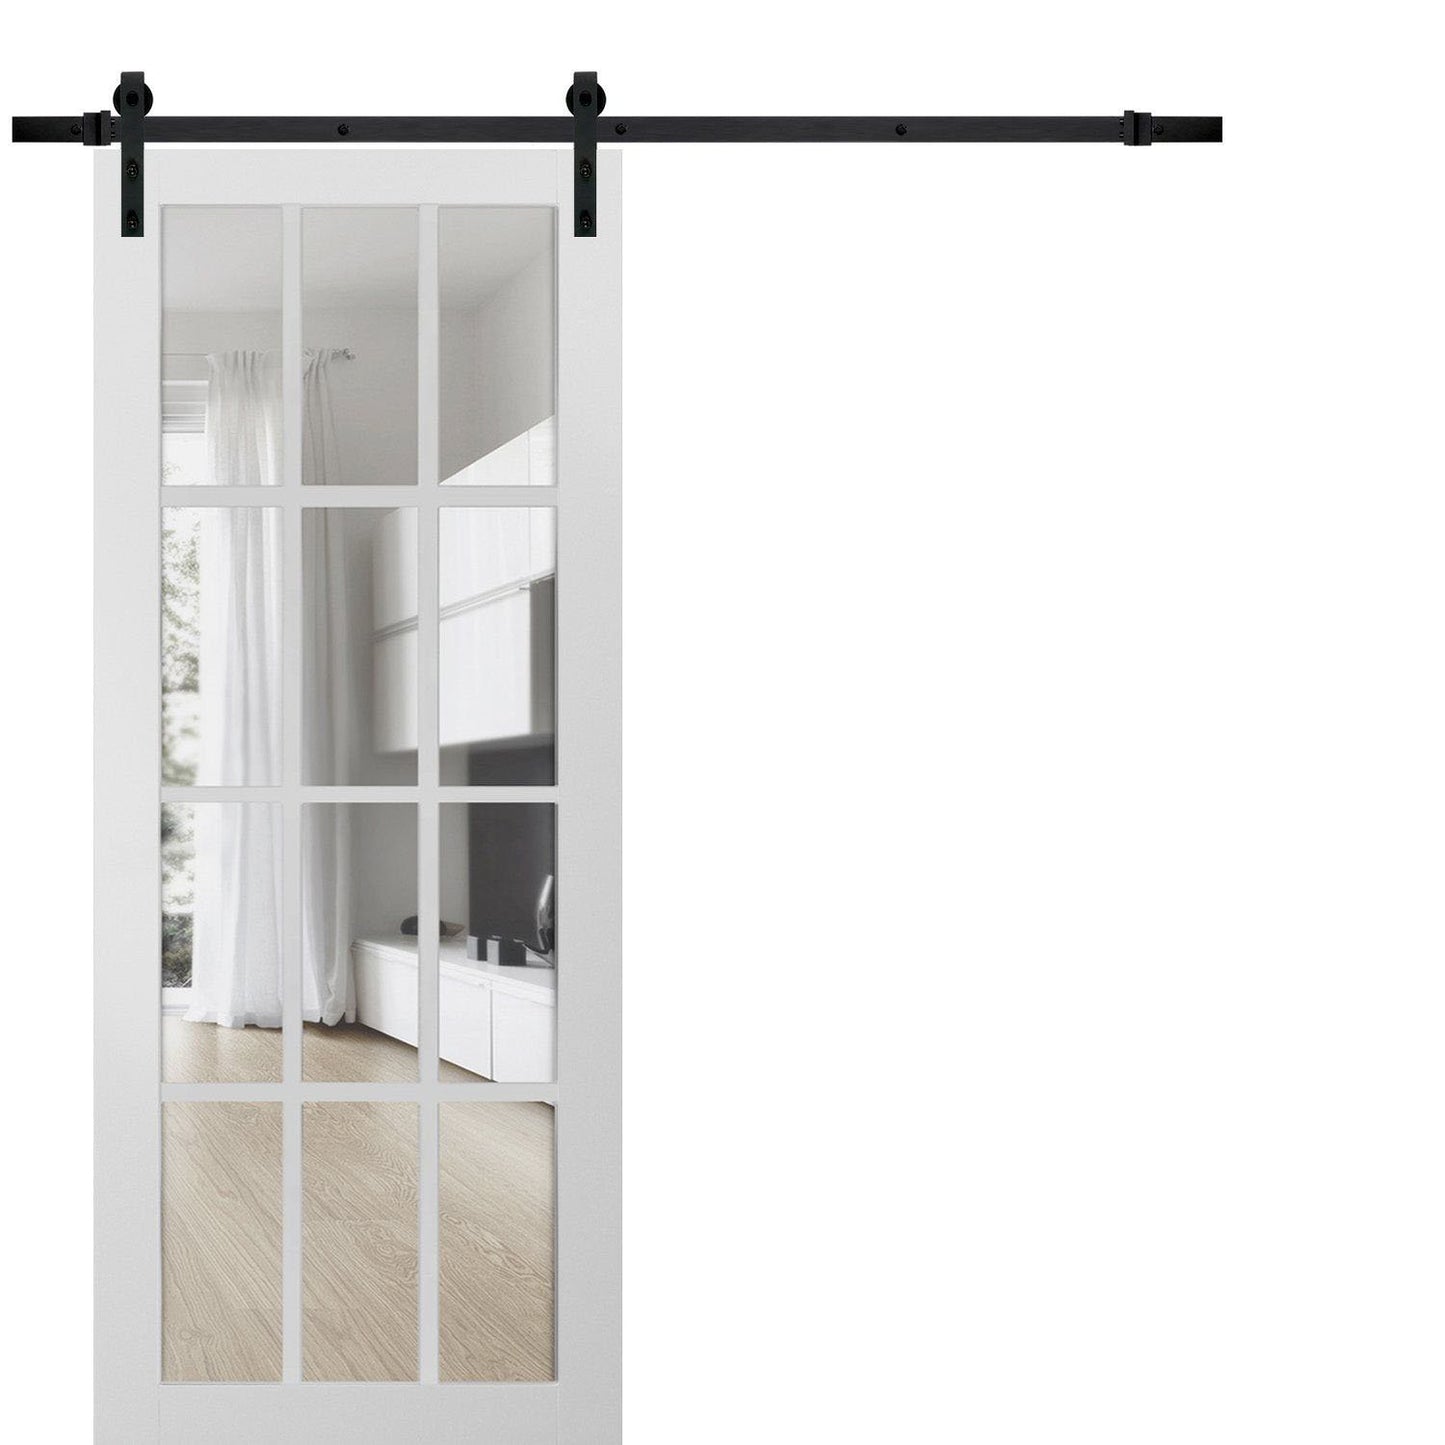 Felicia 3355 Matte White Barn Door with 12 Lites Clear Glass and Black Rail